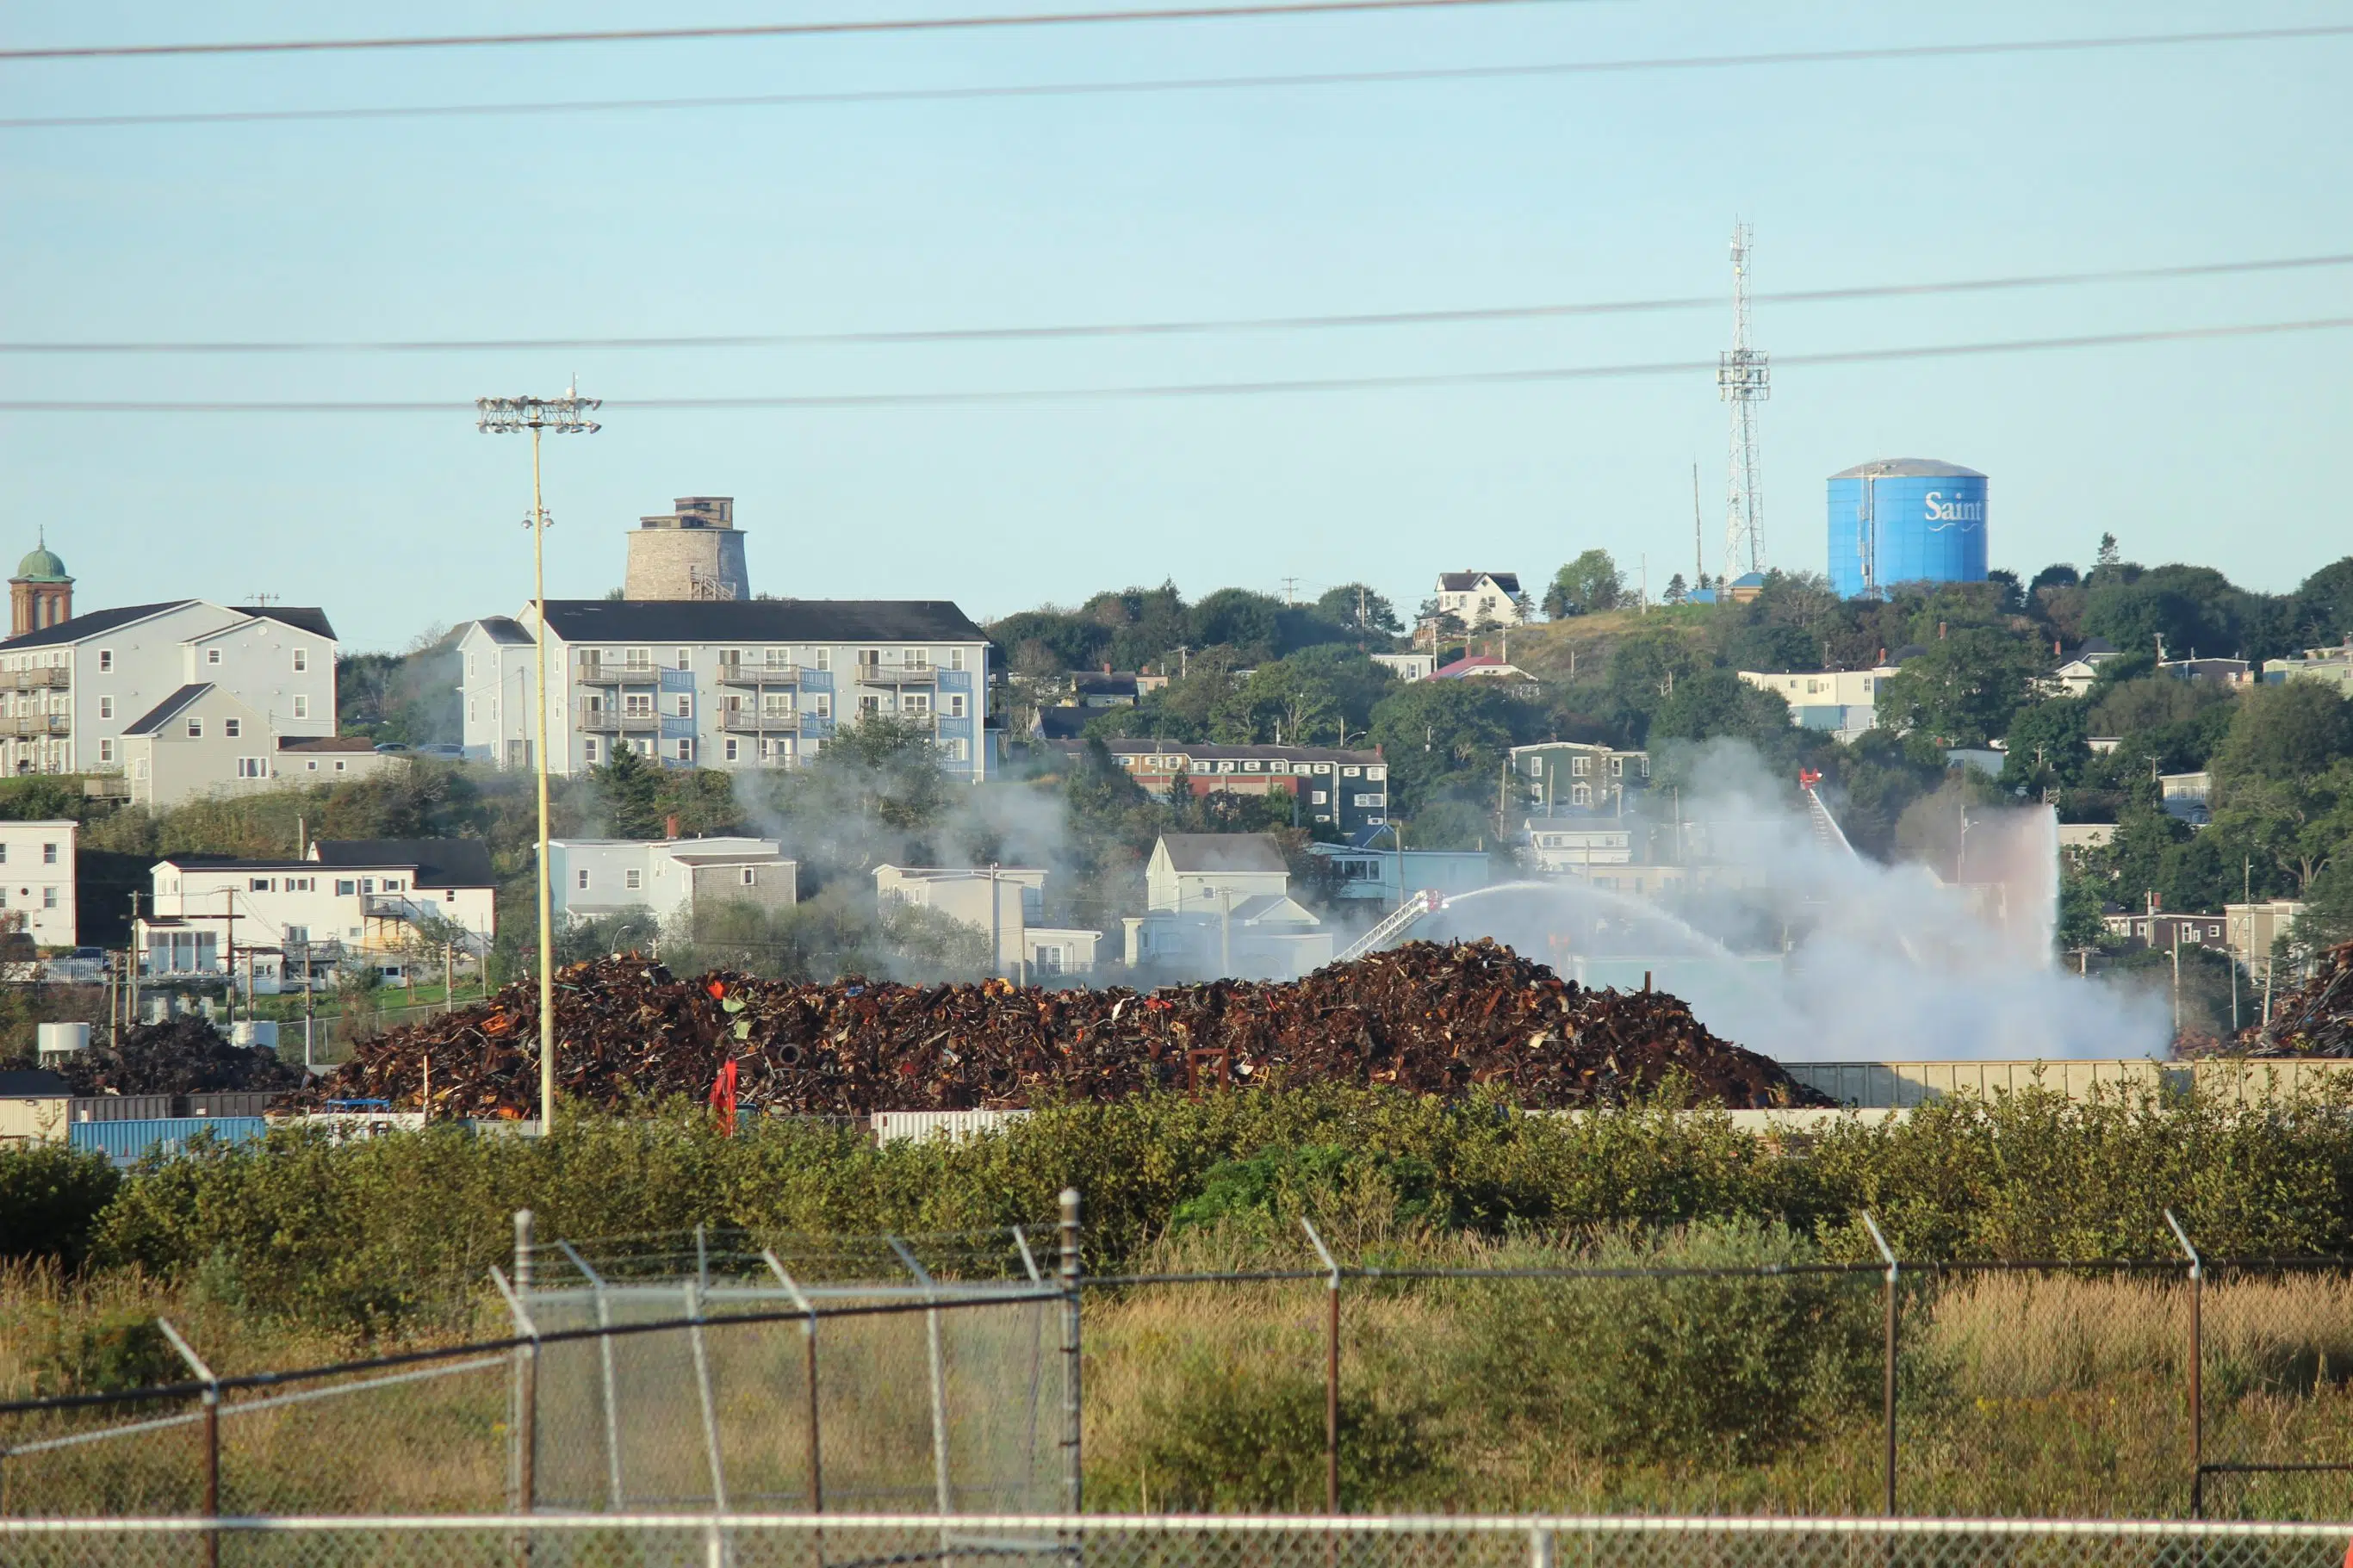 UPDATED: AIM Recycling fire extinguished, say port officials